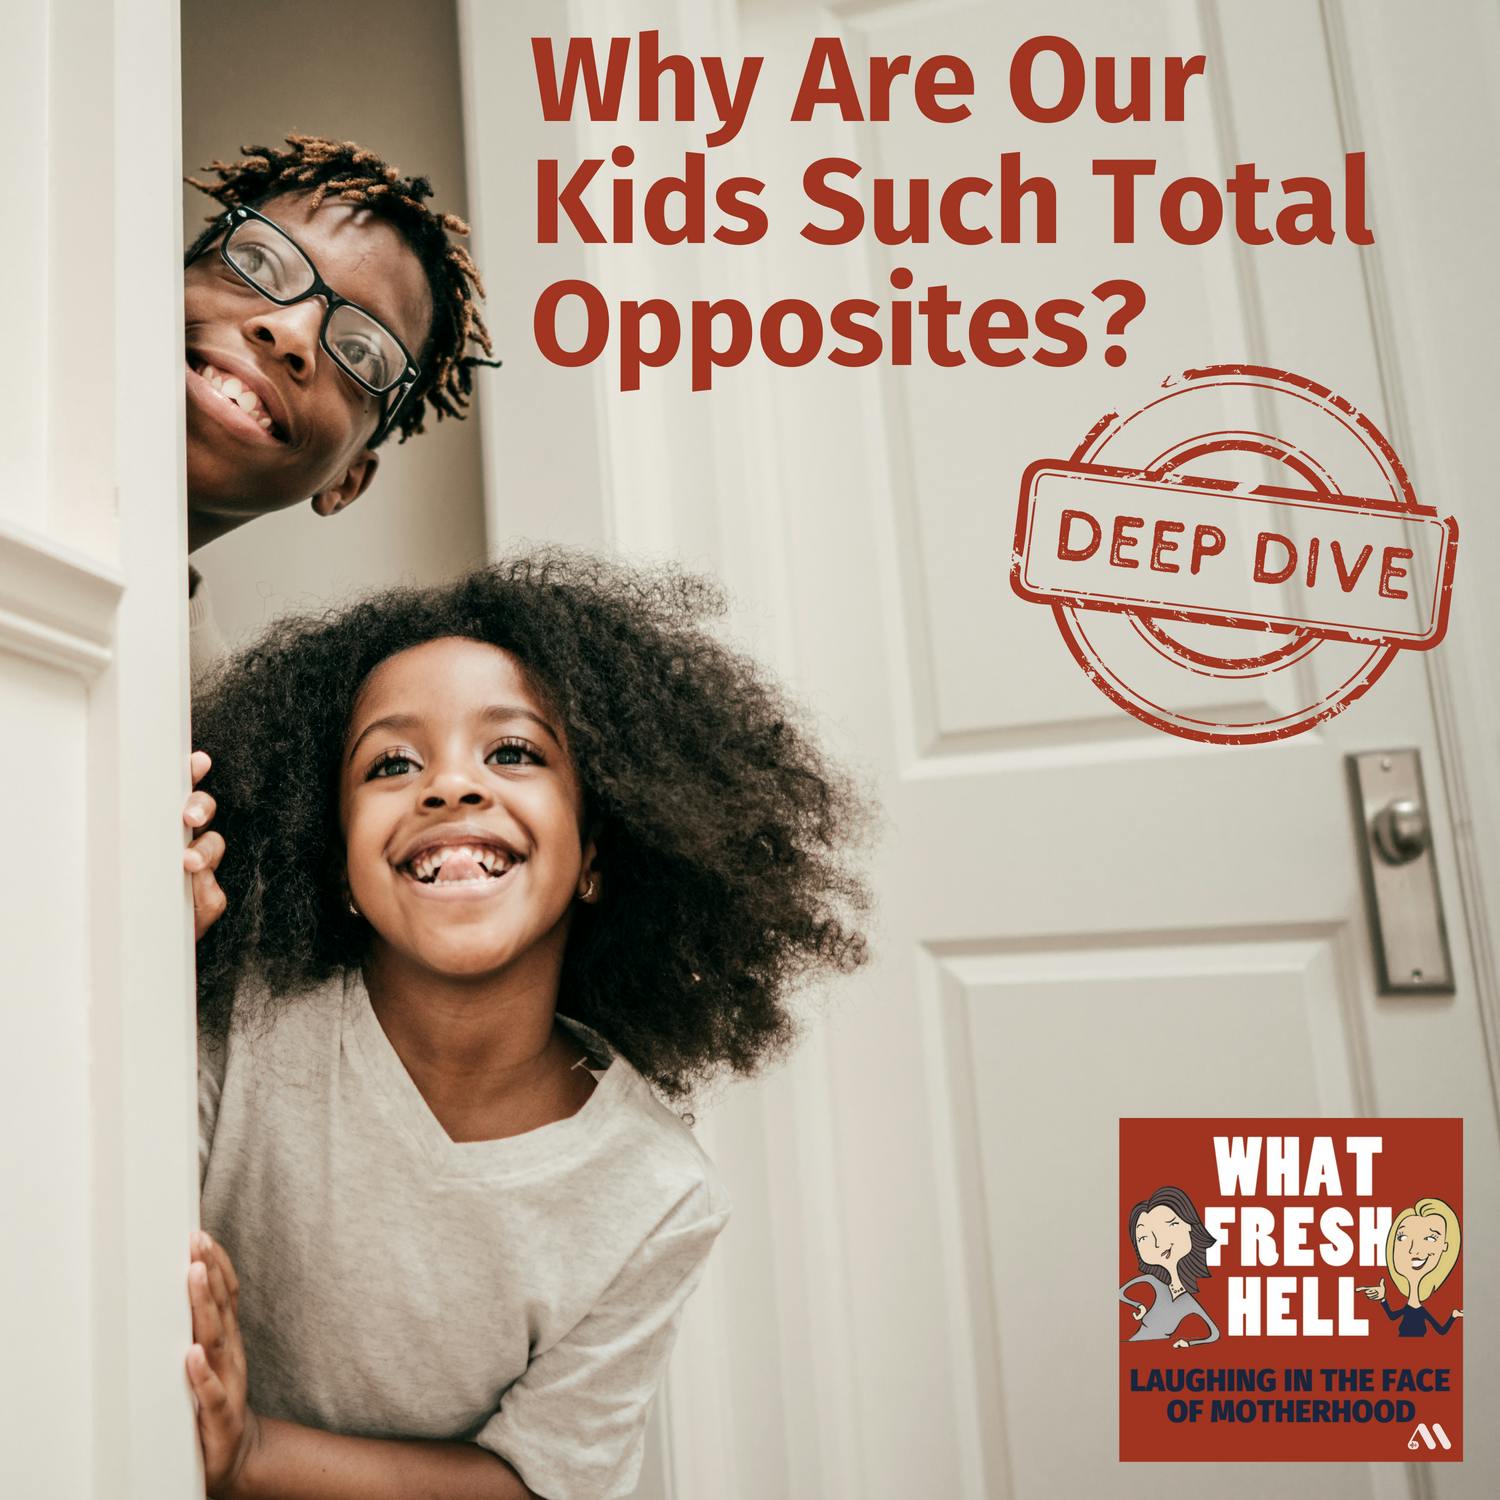 DEEP DIVE: Why Are Our Kids Such Total Opposites?